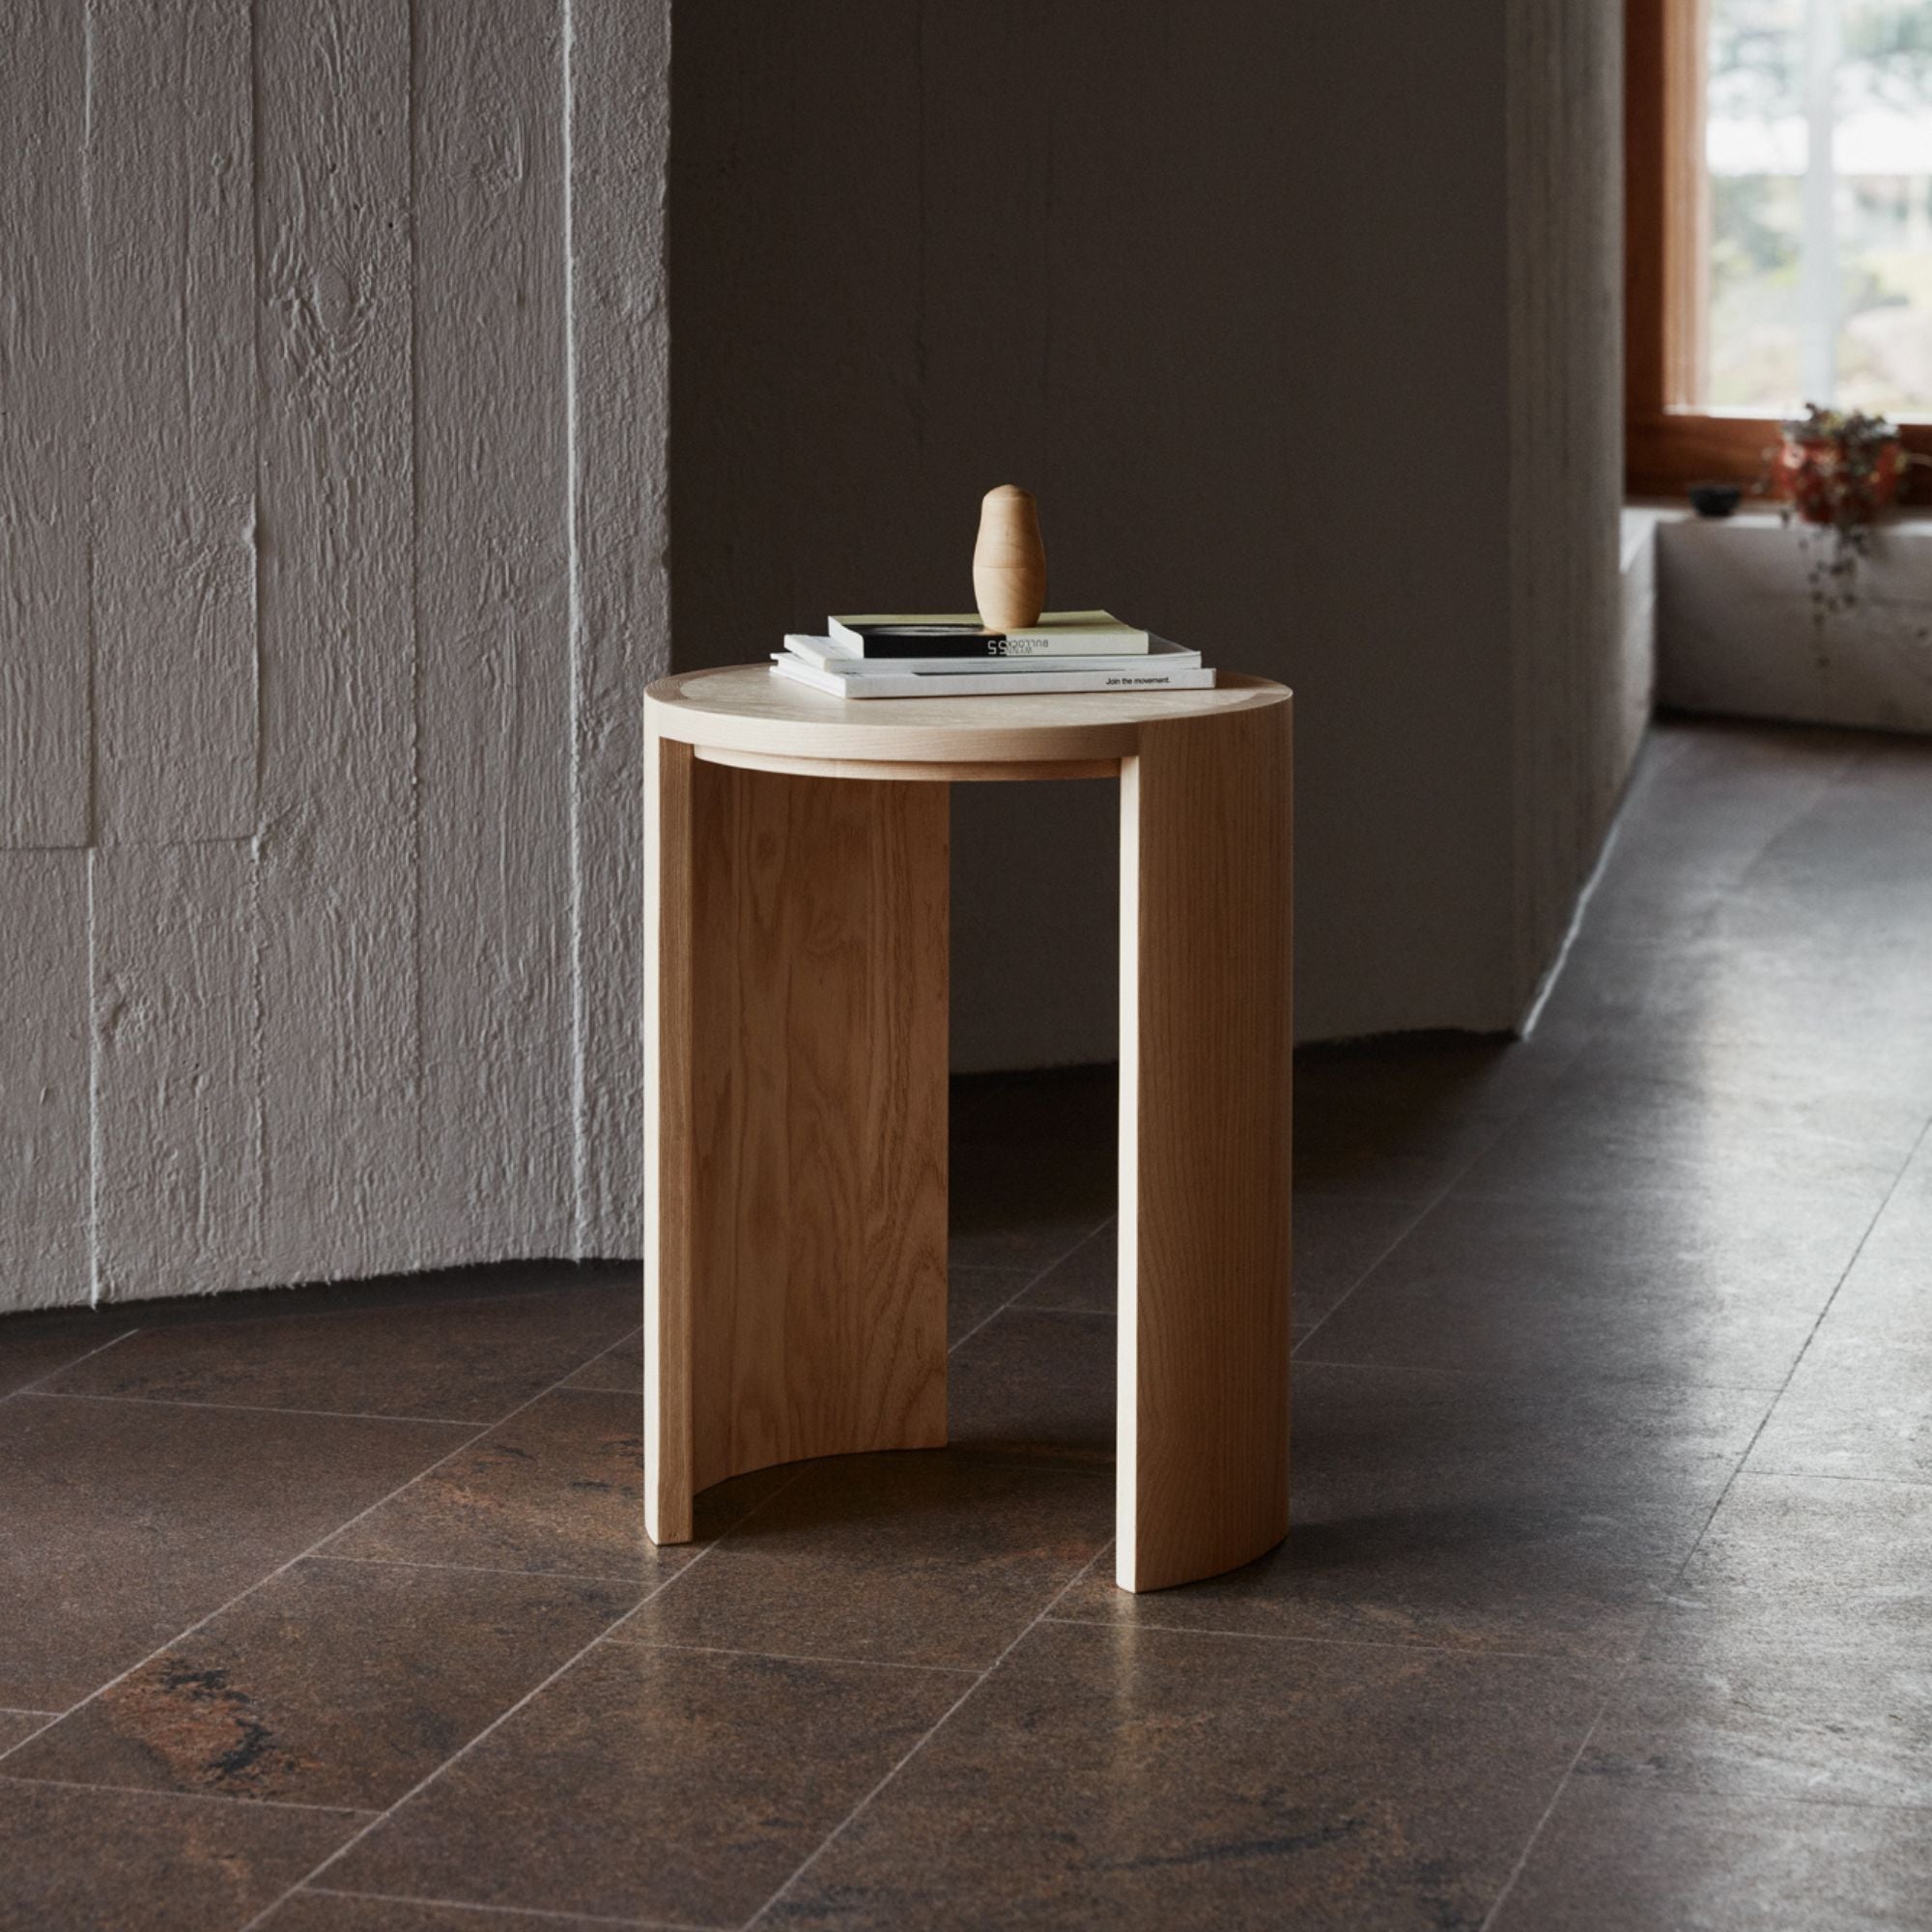 Airisto Stool - THAT COOL LIVING